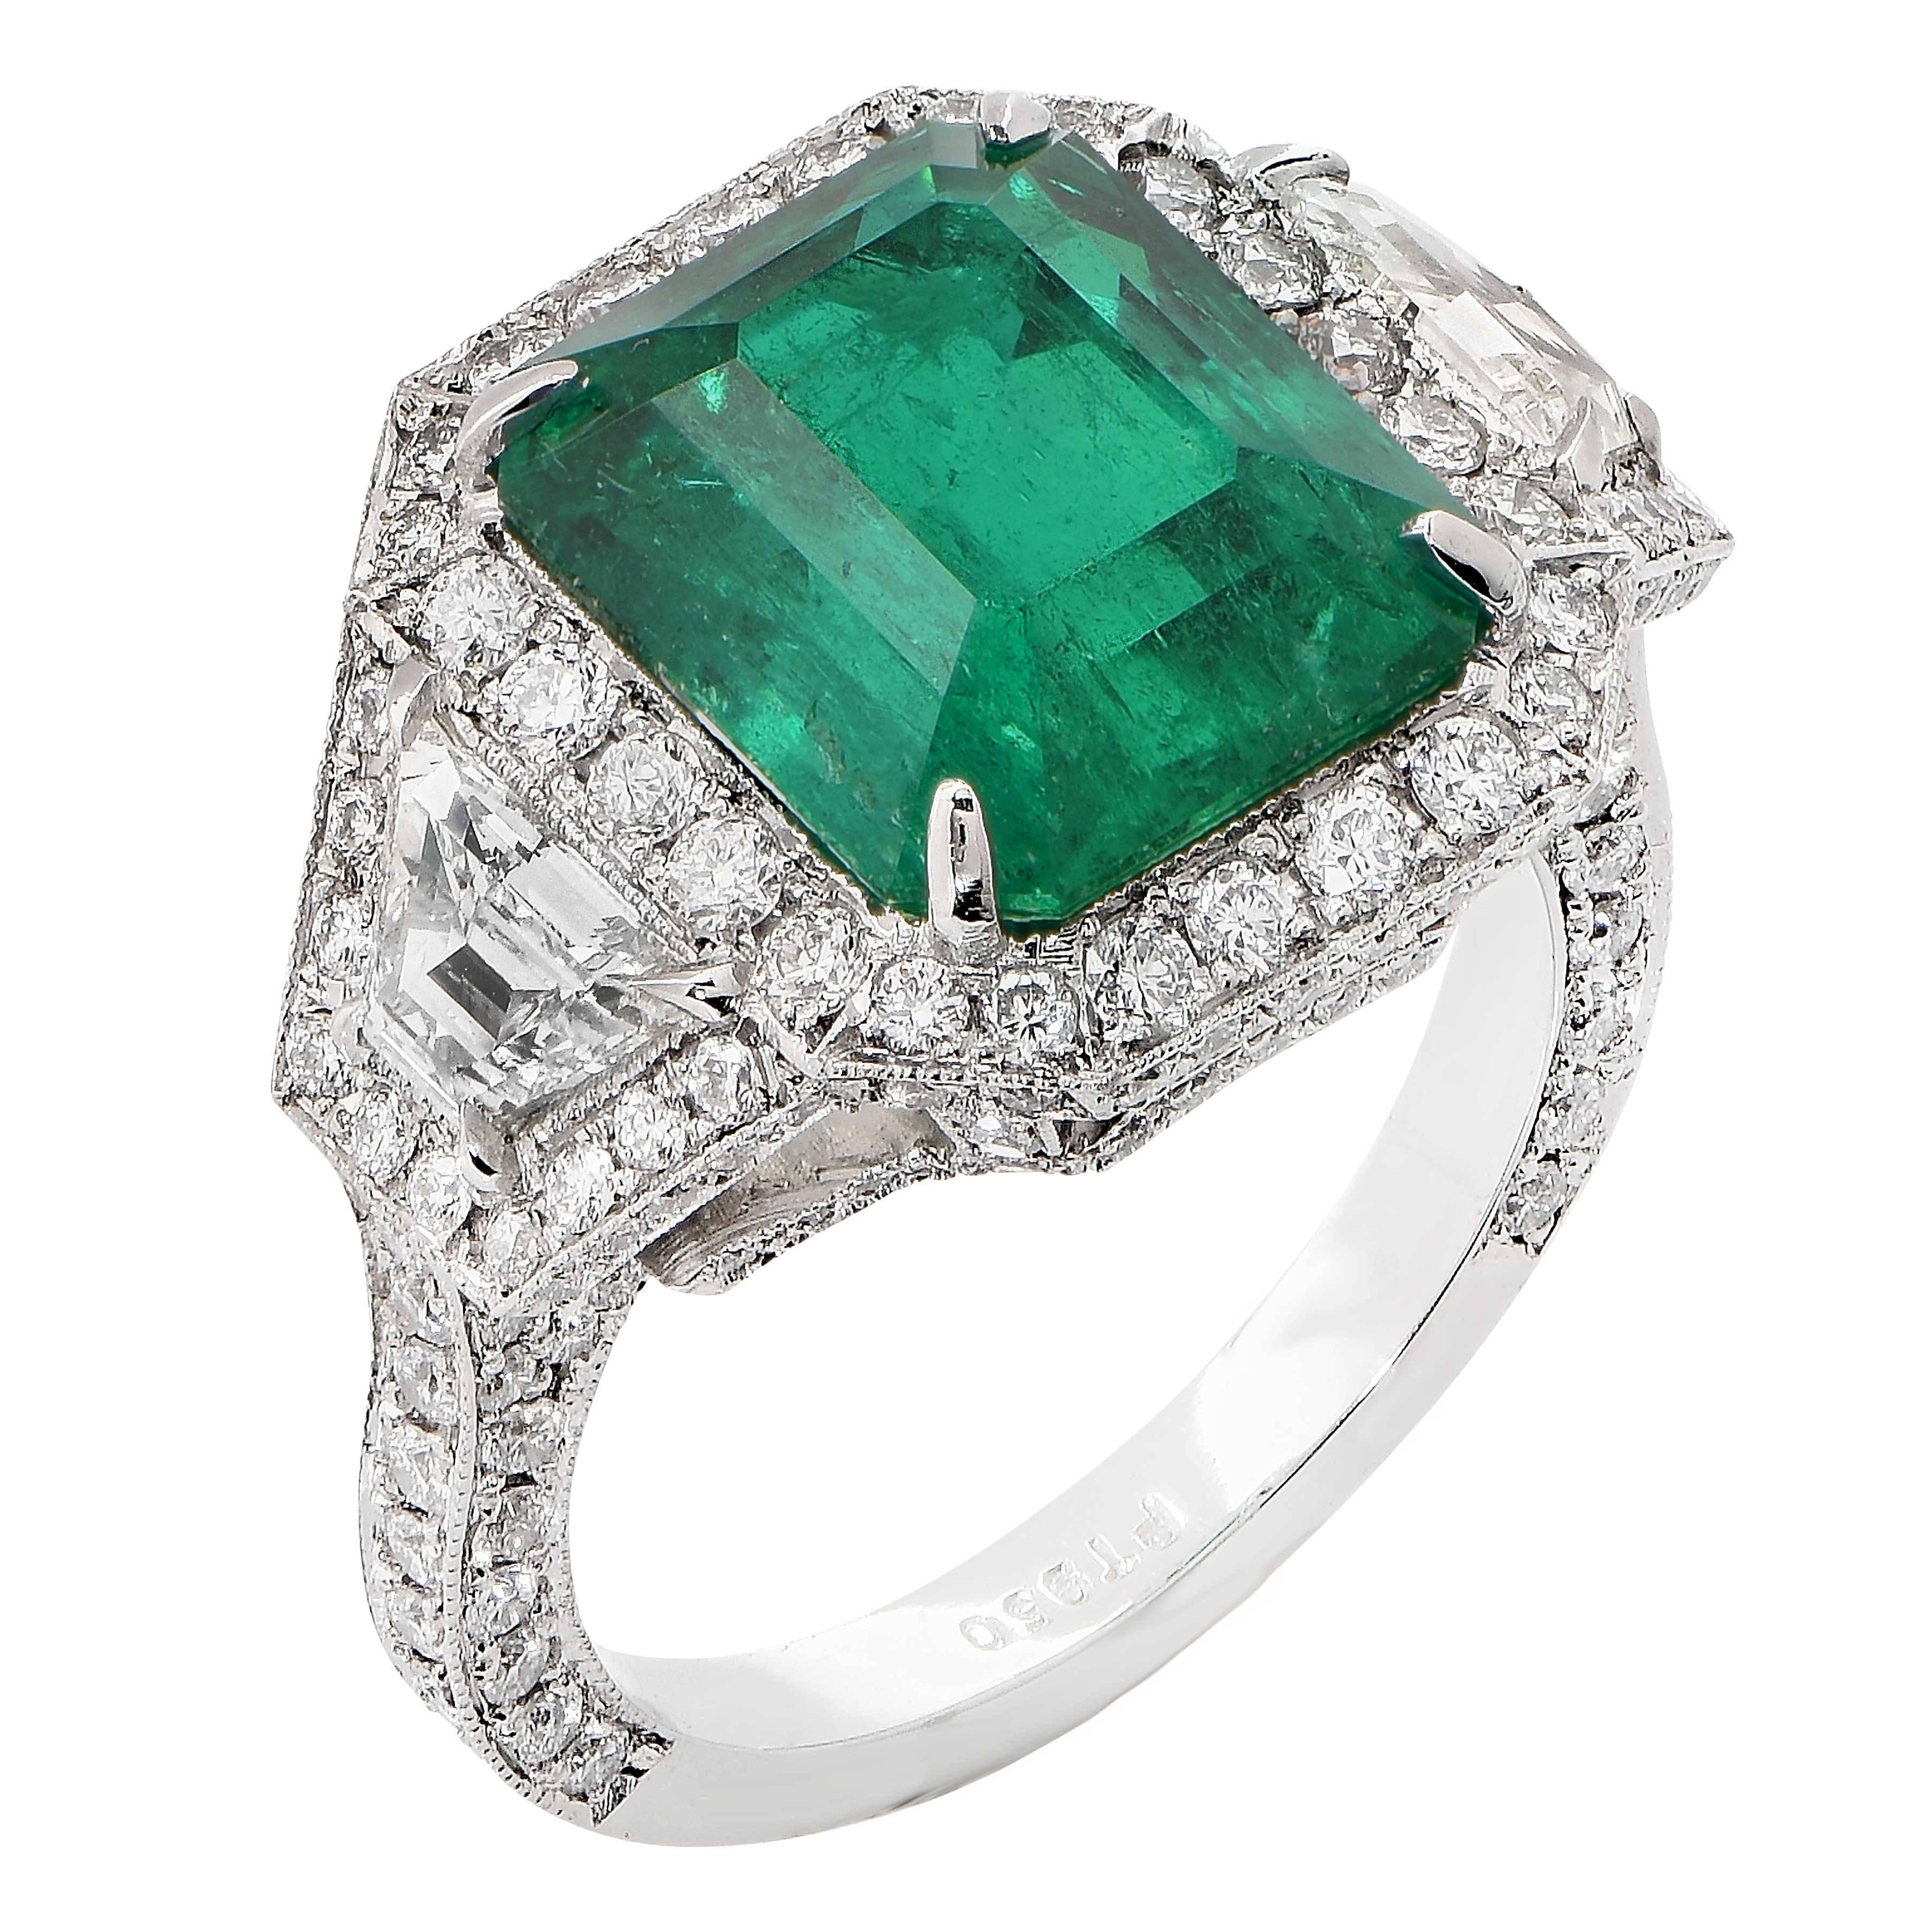 This ring features an exquisite 6.10 carat Colombian emerald. The emerald has not been oiled or treated in any way, as per an AGL certificate. The ring also contains 2 trapezoid diamonds weighing 0.71 carats and round diamonds weighing 1.38